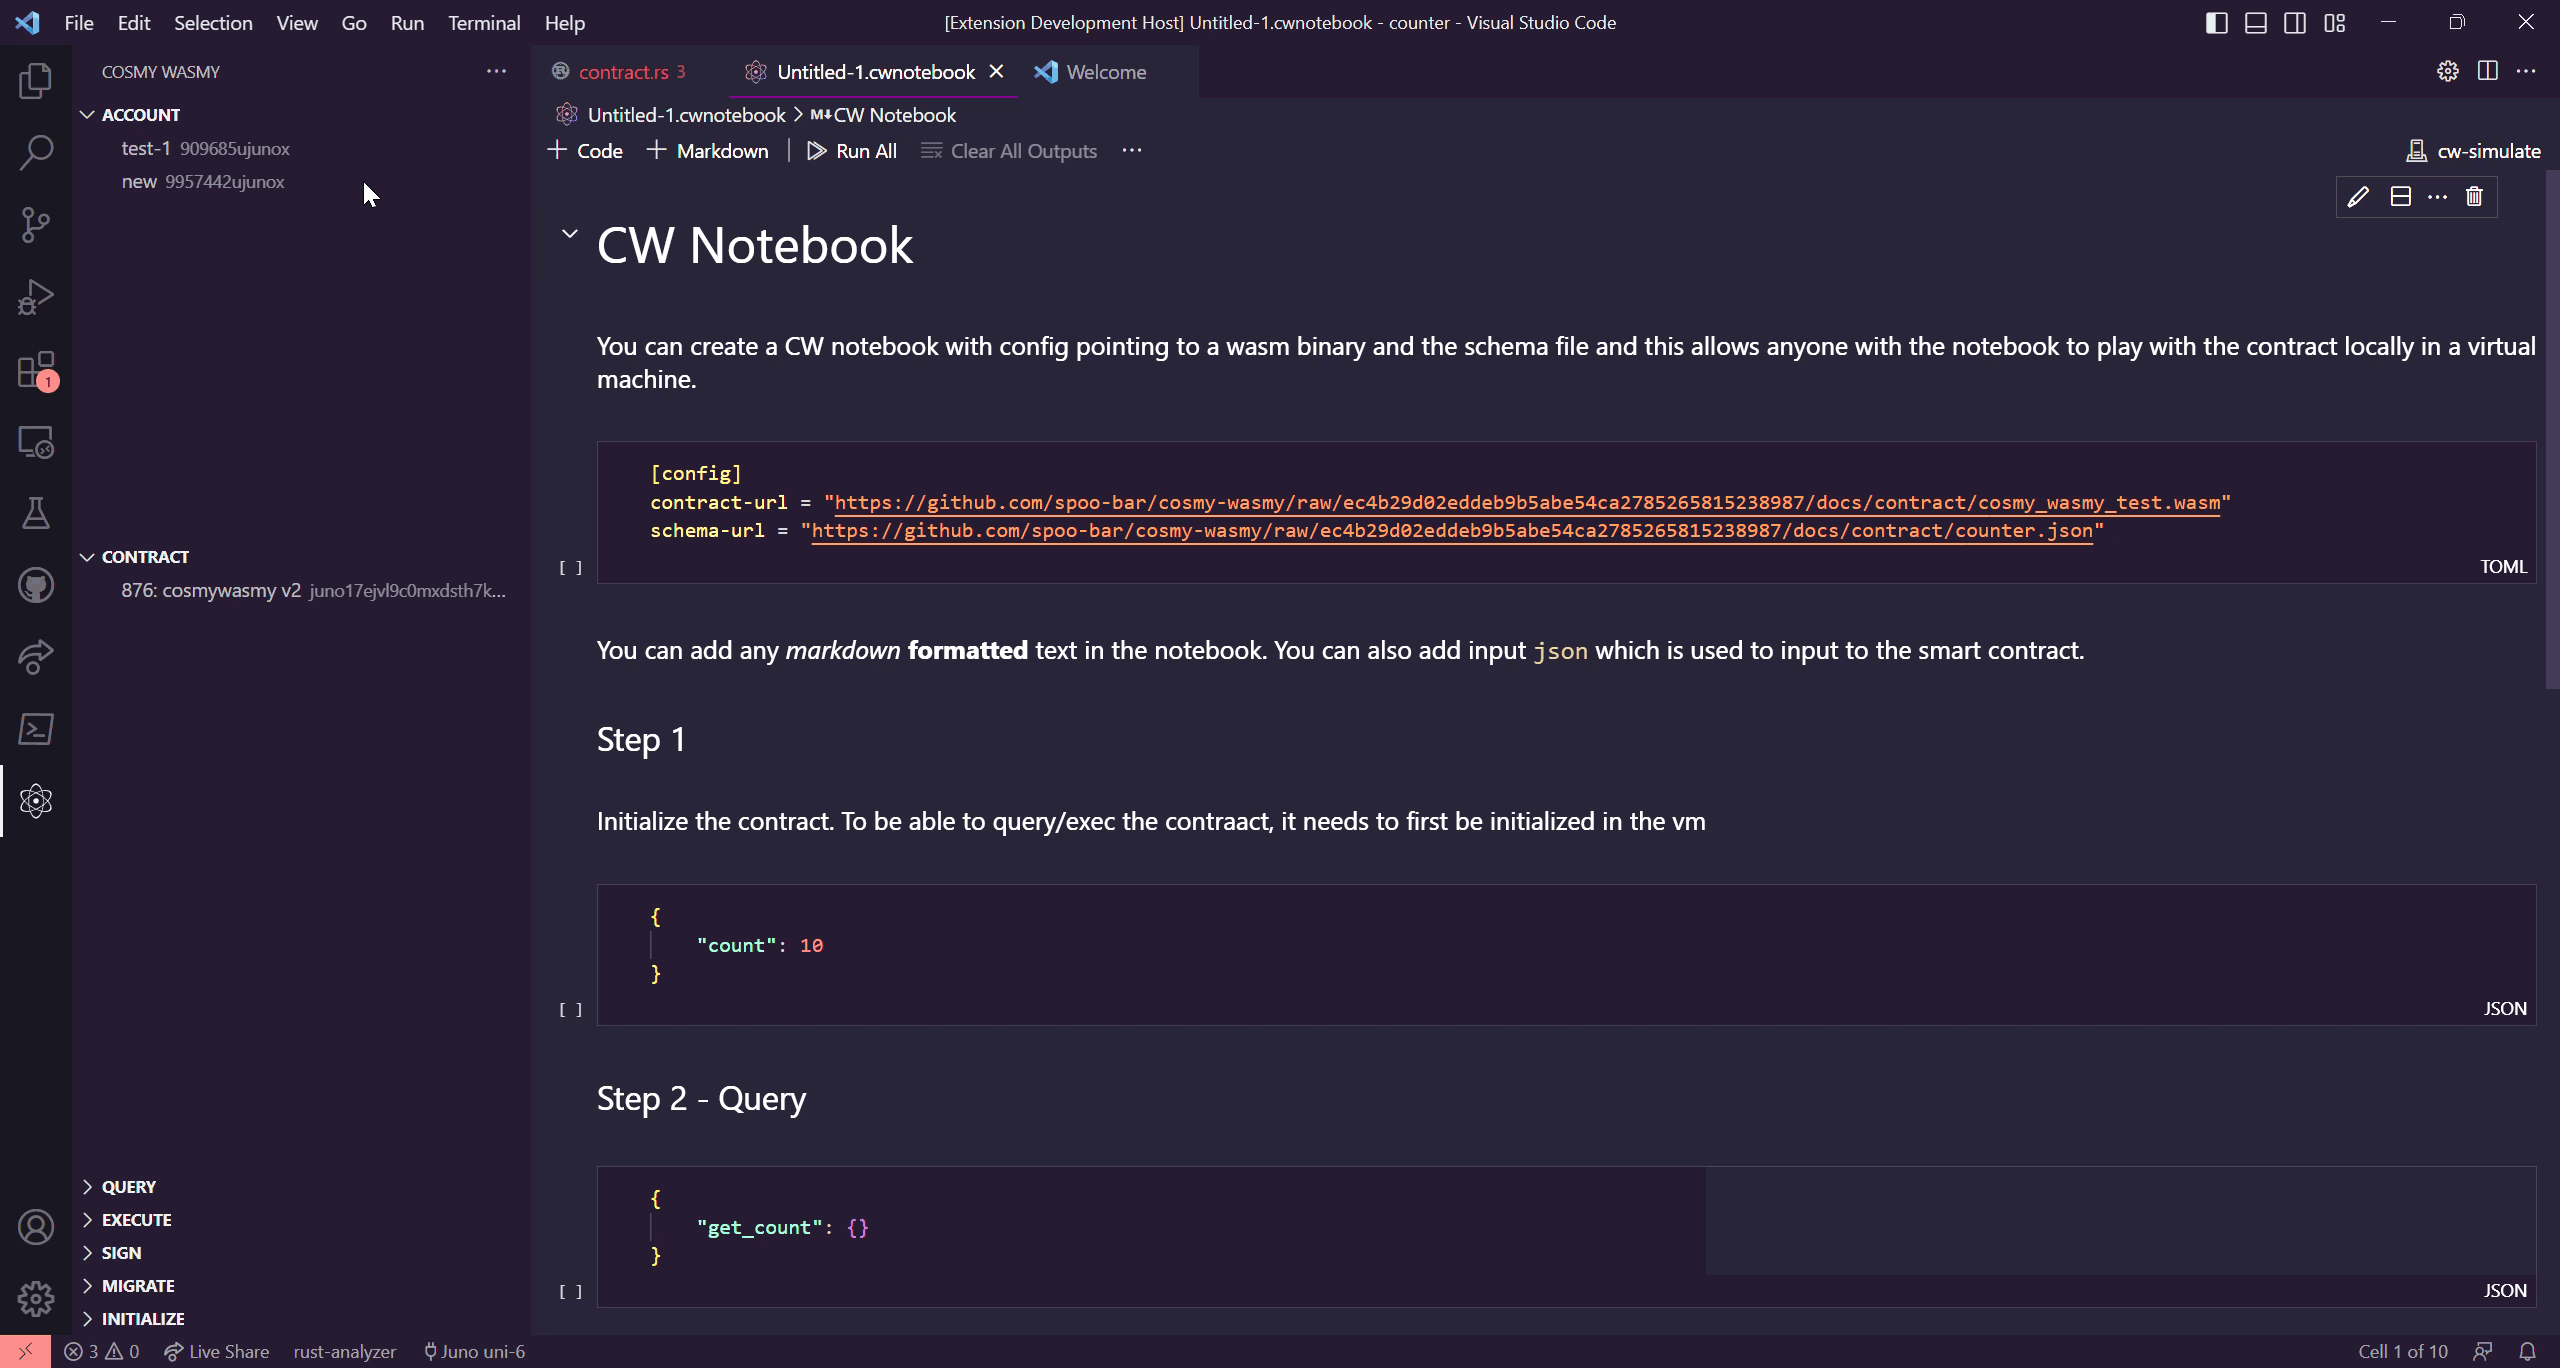 CW Notebook execution